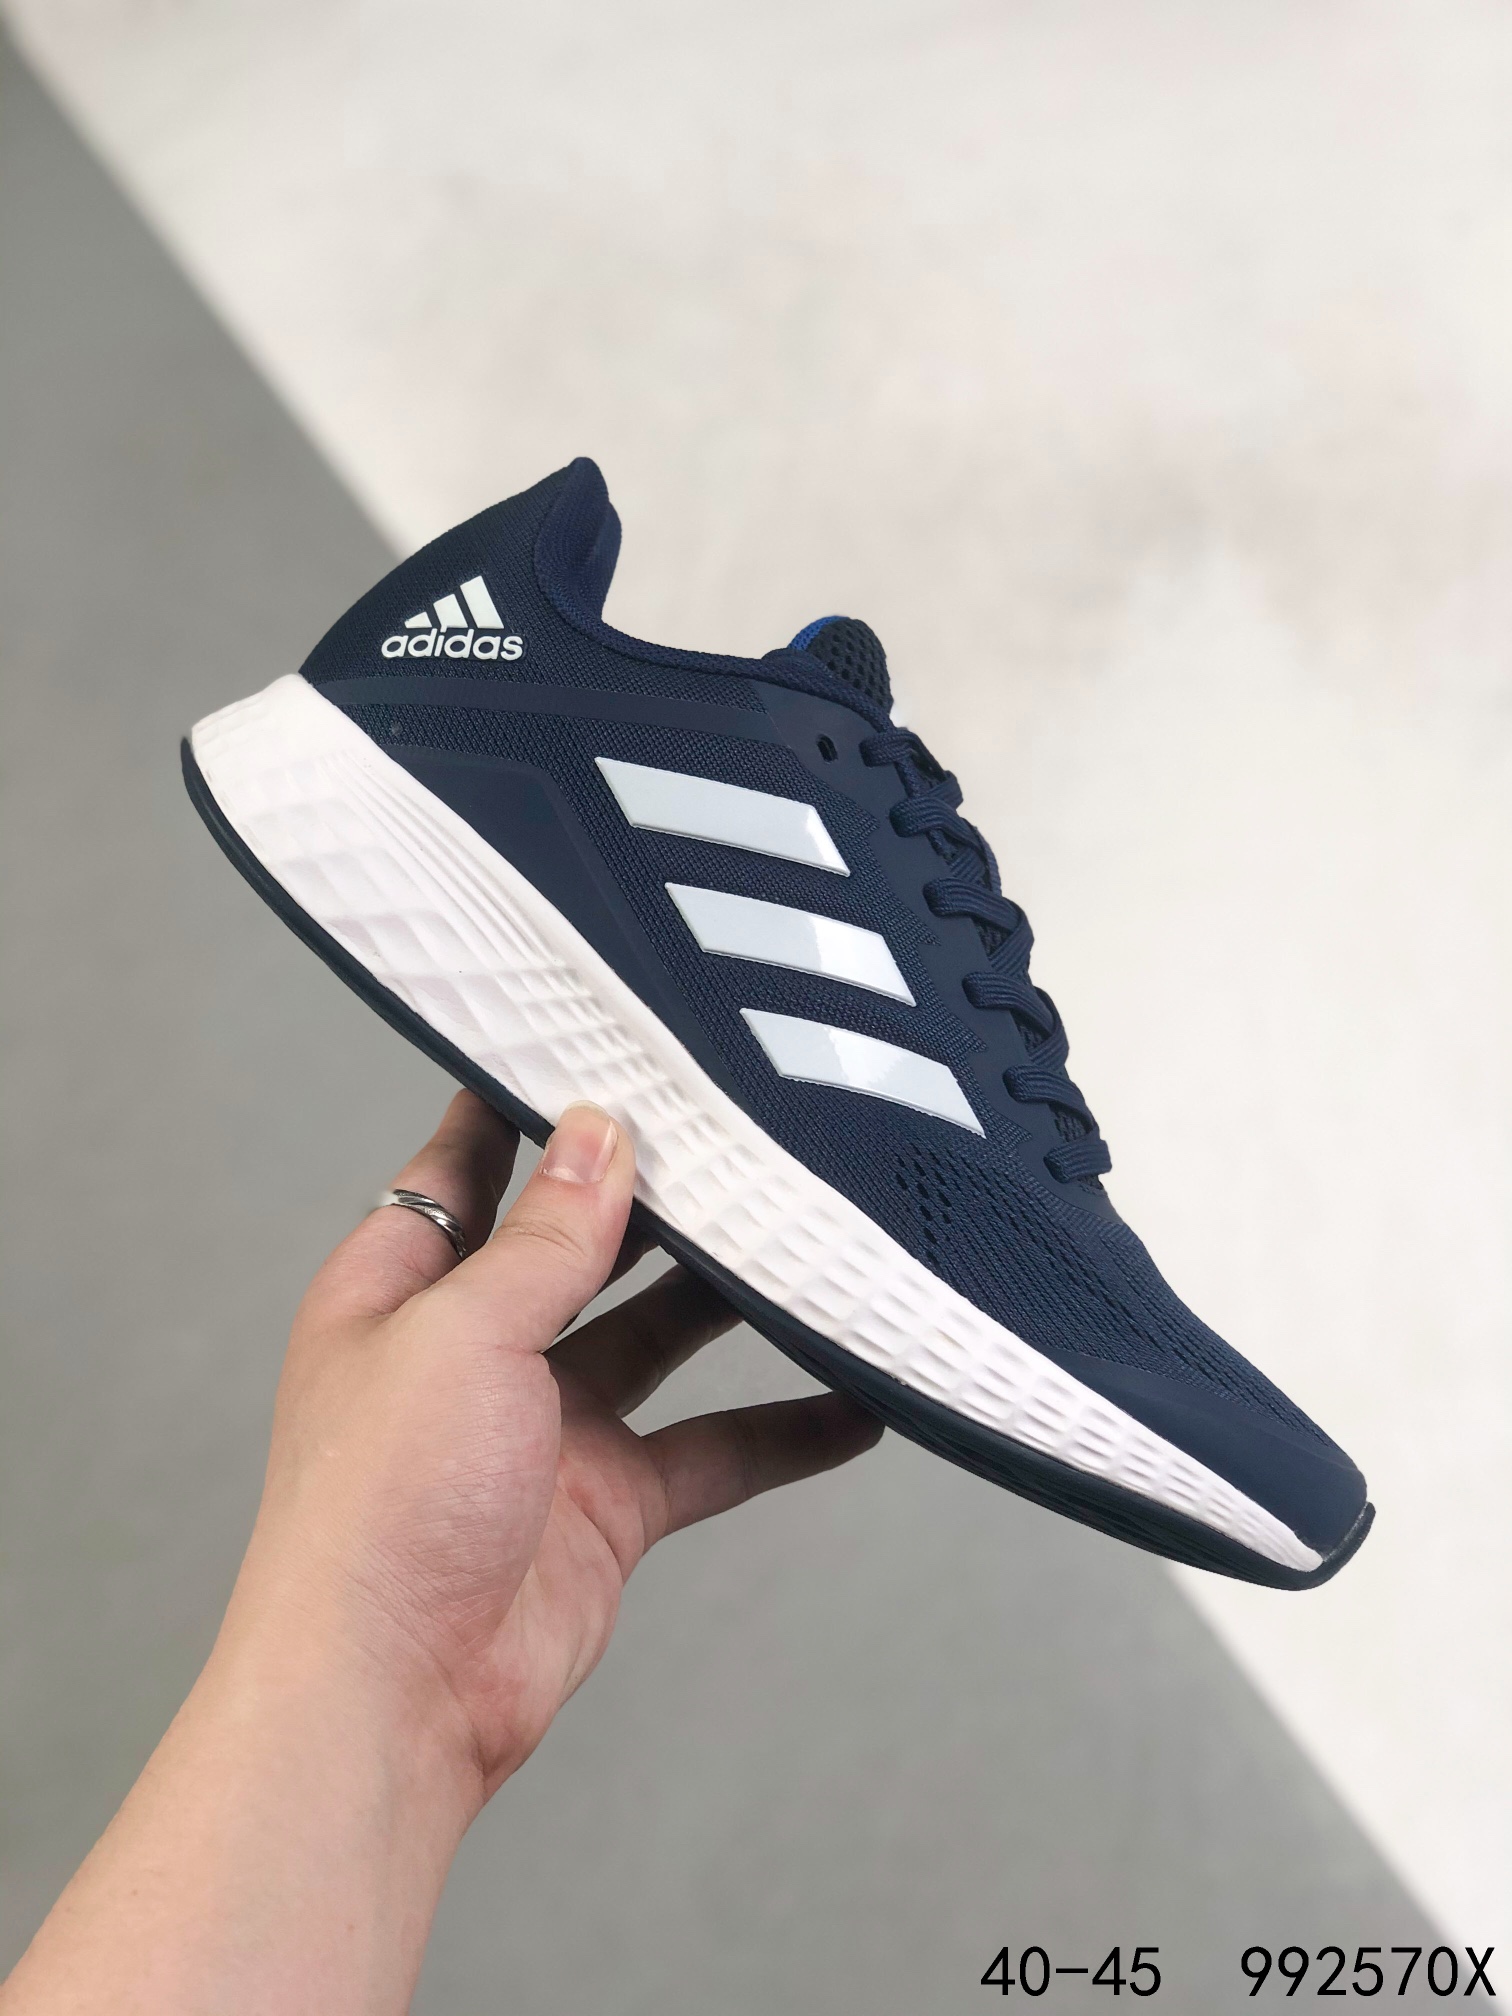 ADIDAS DURAMO SL Shoes Adidas Shoes for Women Sale Sneakers Authentic Original Free Shipping Flagship Store Design 2022 Class A Breathable on Sale Fashion Basketball Train Resistant Breathable | Lazada PH